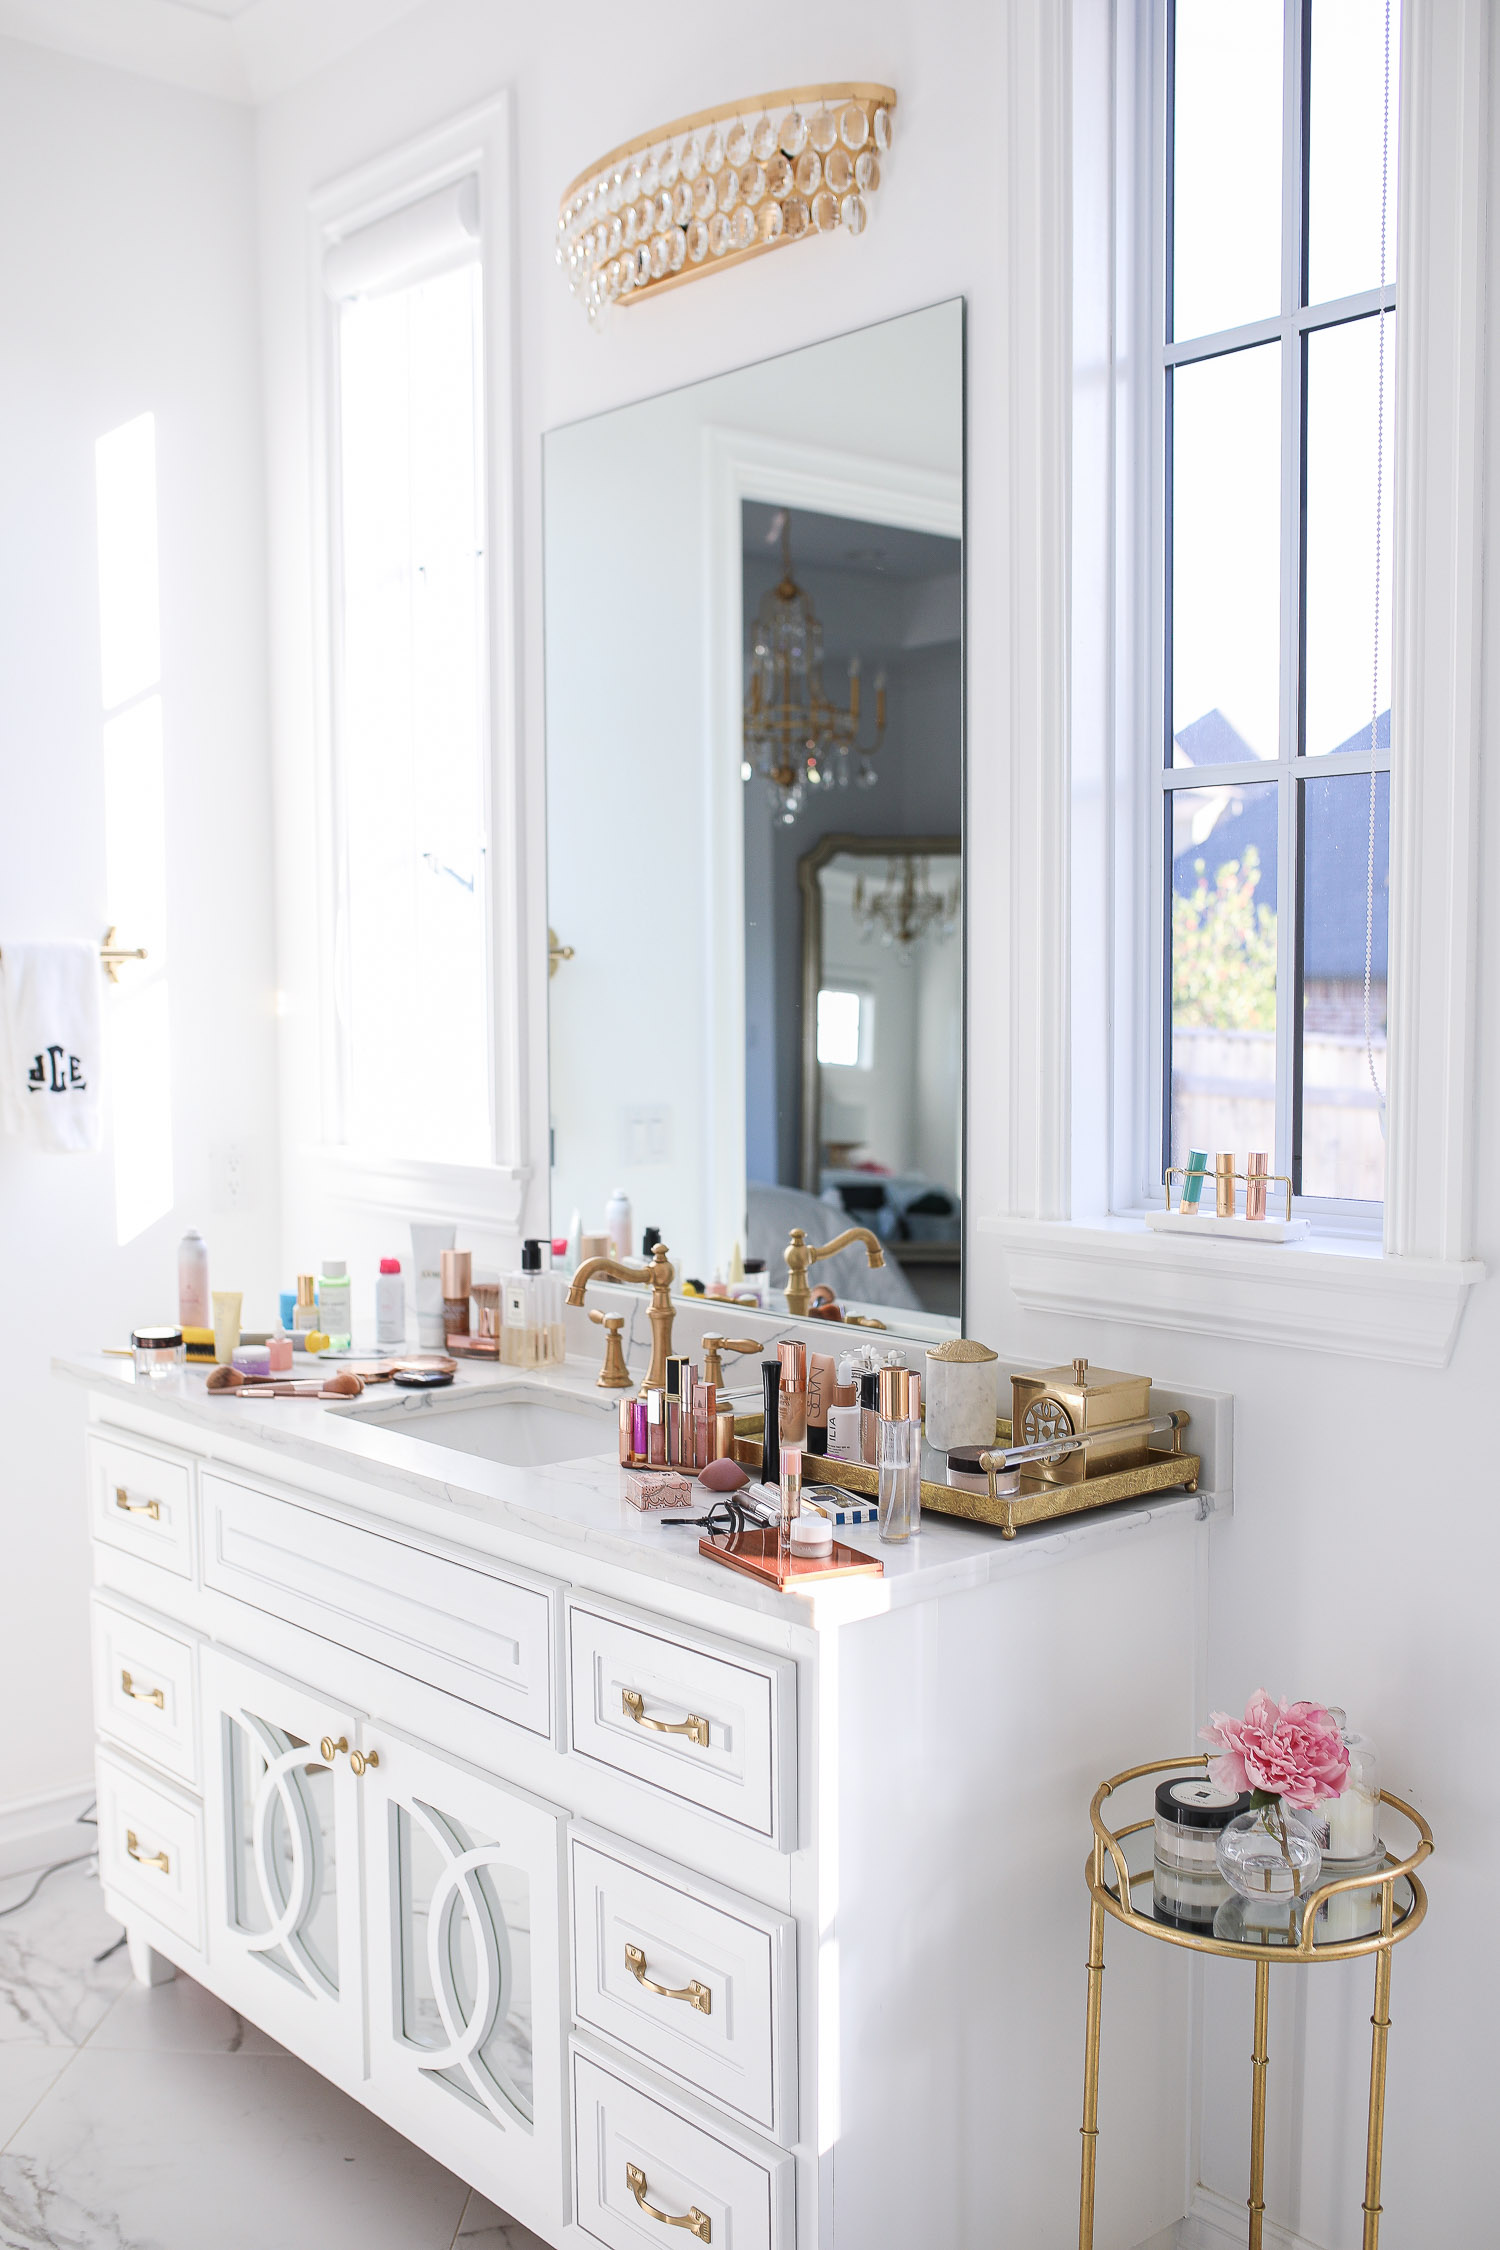 Sephora savings event fall 2020, beauty blogger sephora favorites fall 2020, emily ann gemma |Sephora Beauty Insider Sale by popular US beauty blog, The Sweetest Thing: image of bathroom vanity covered in Sephora beauty products. 